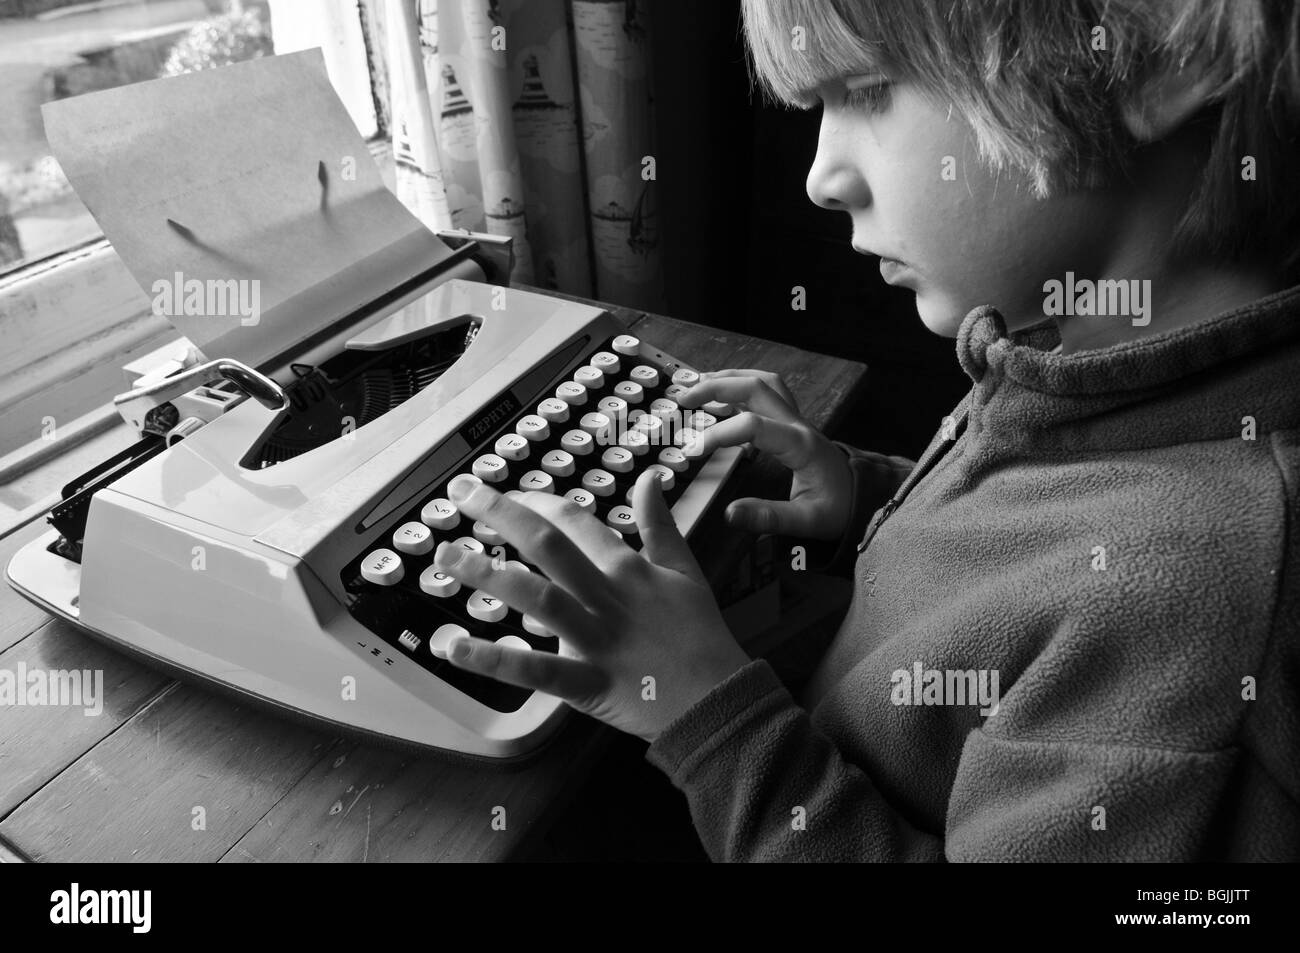 Young boy sitting at desk by the window using a typewriter, pressing keys to type a letter. Stock Photo